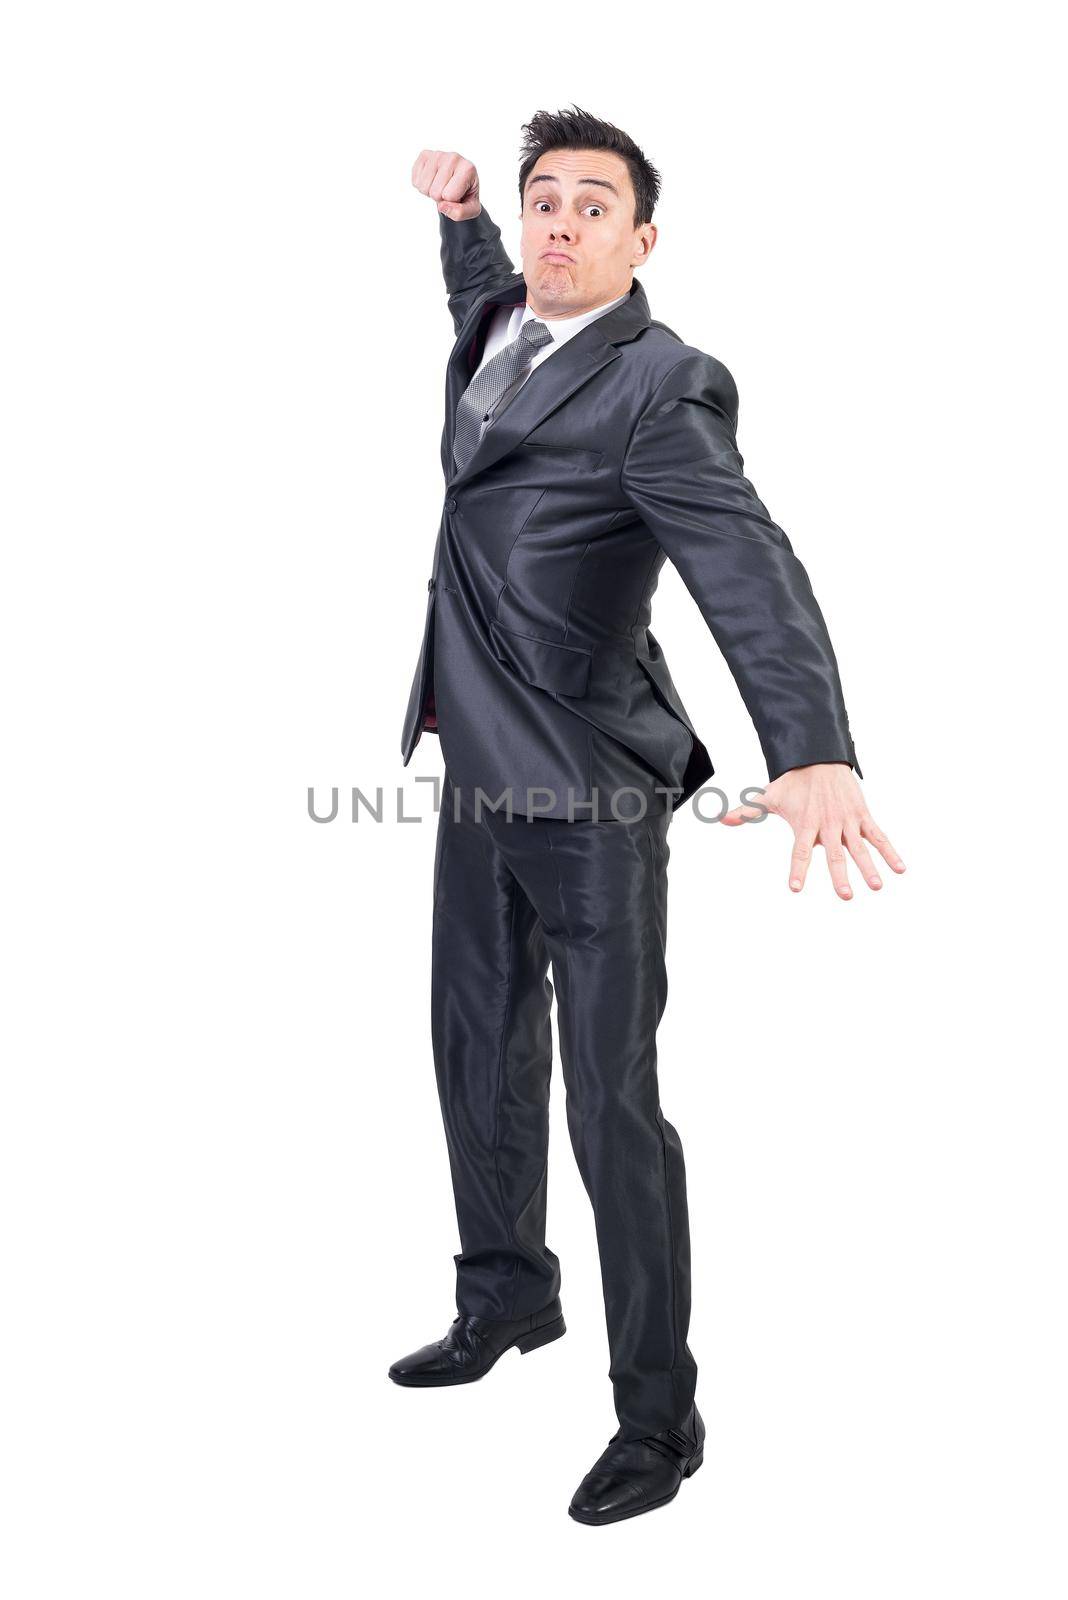 Aggressive man in formal suit. White background by ivanmoreno